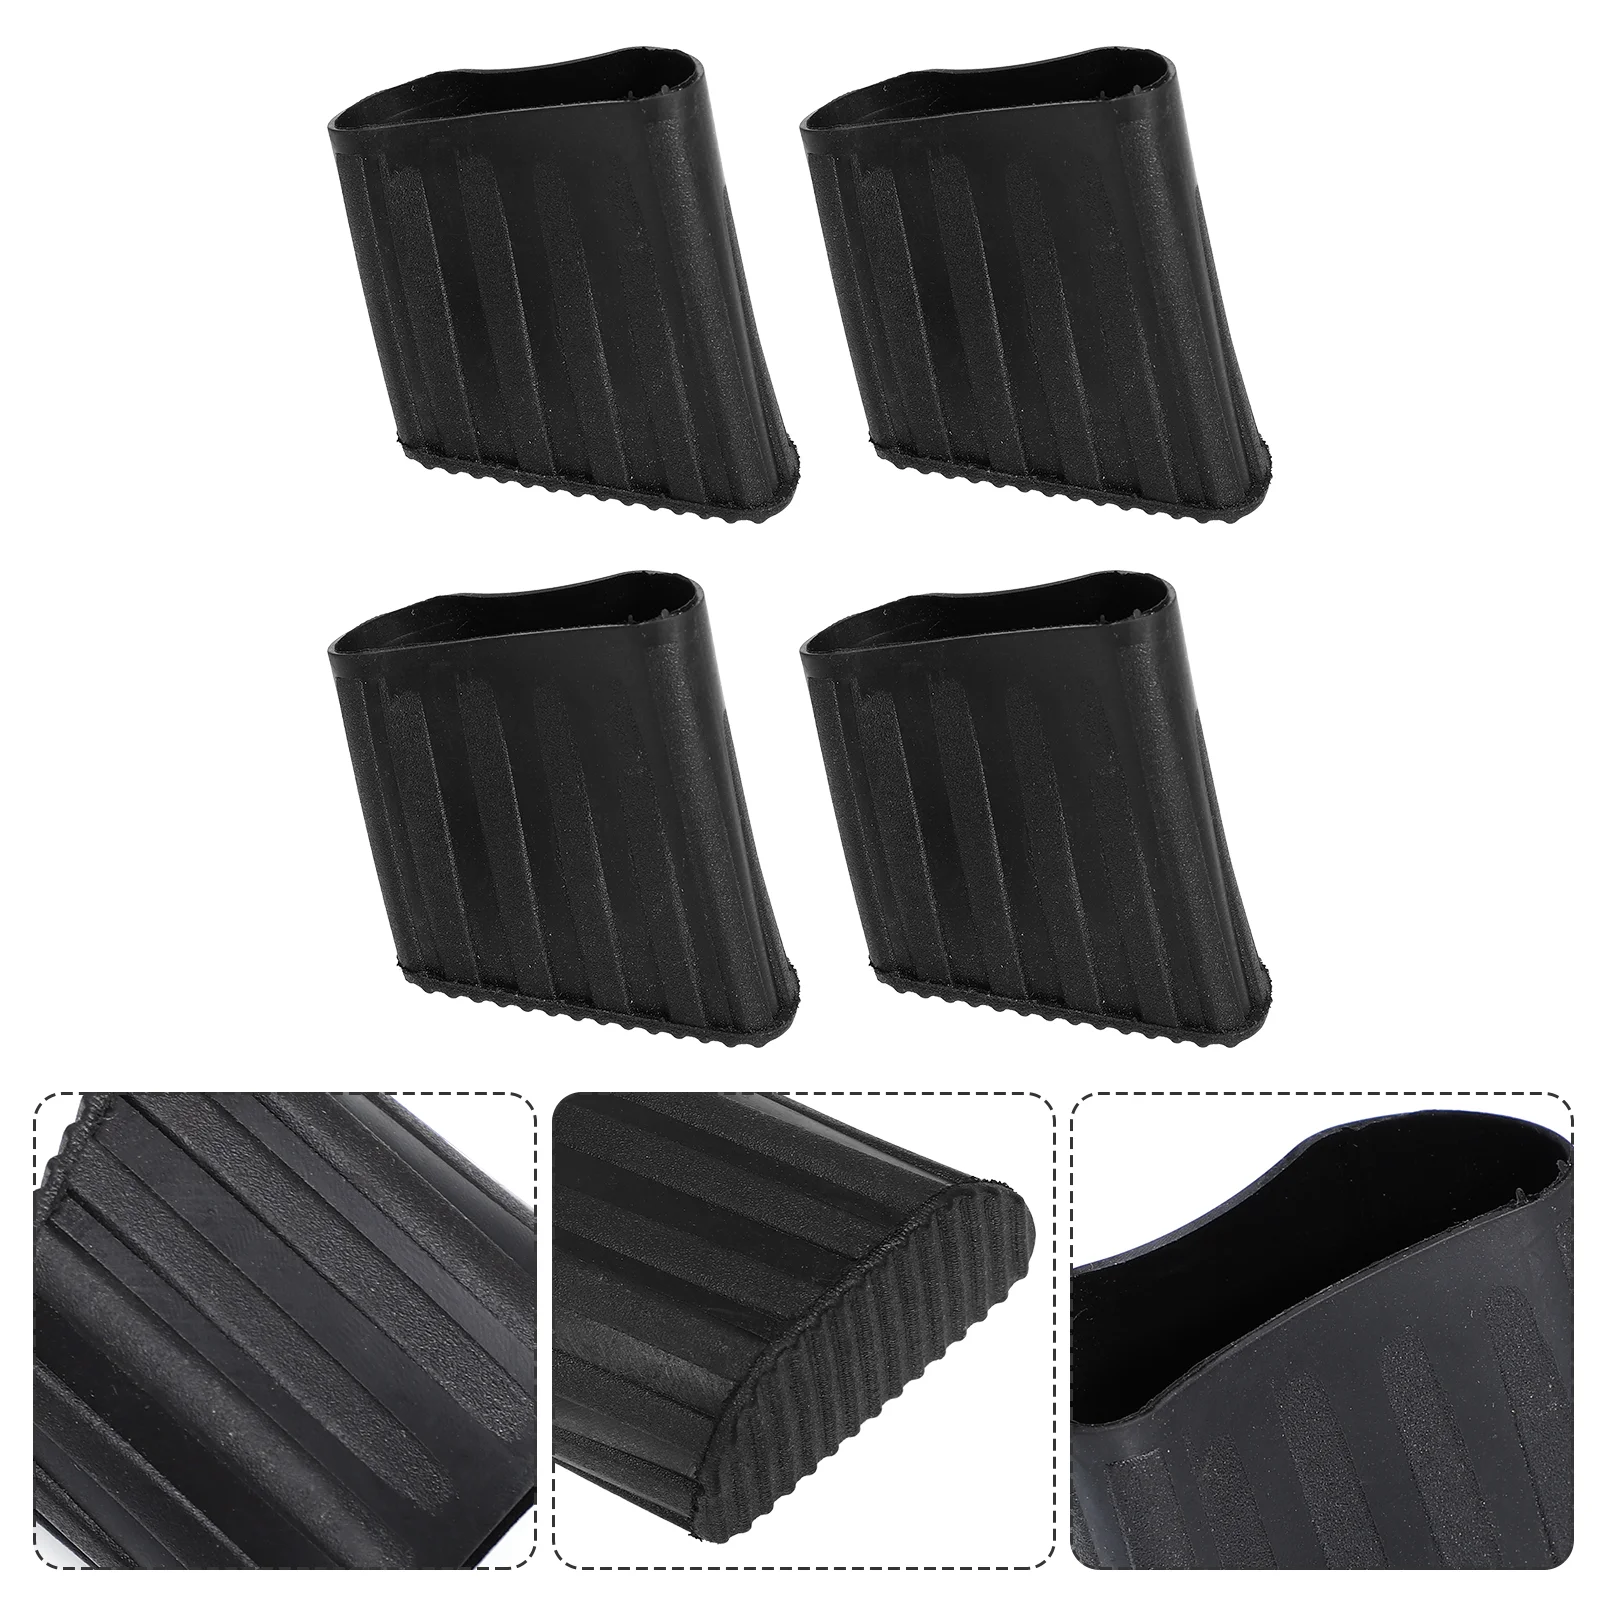 

4Pcs Folding Ladder Feet Protective Covers Safe Ladder Foot Pads for Home